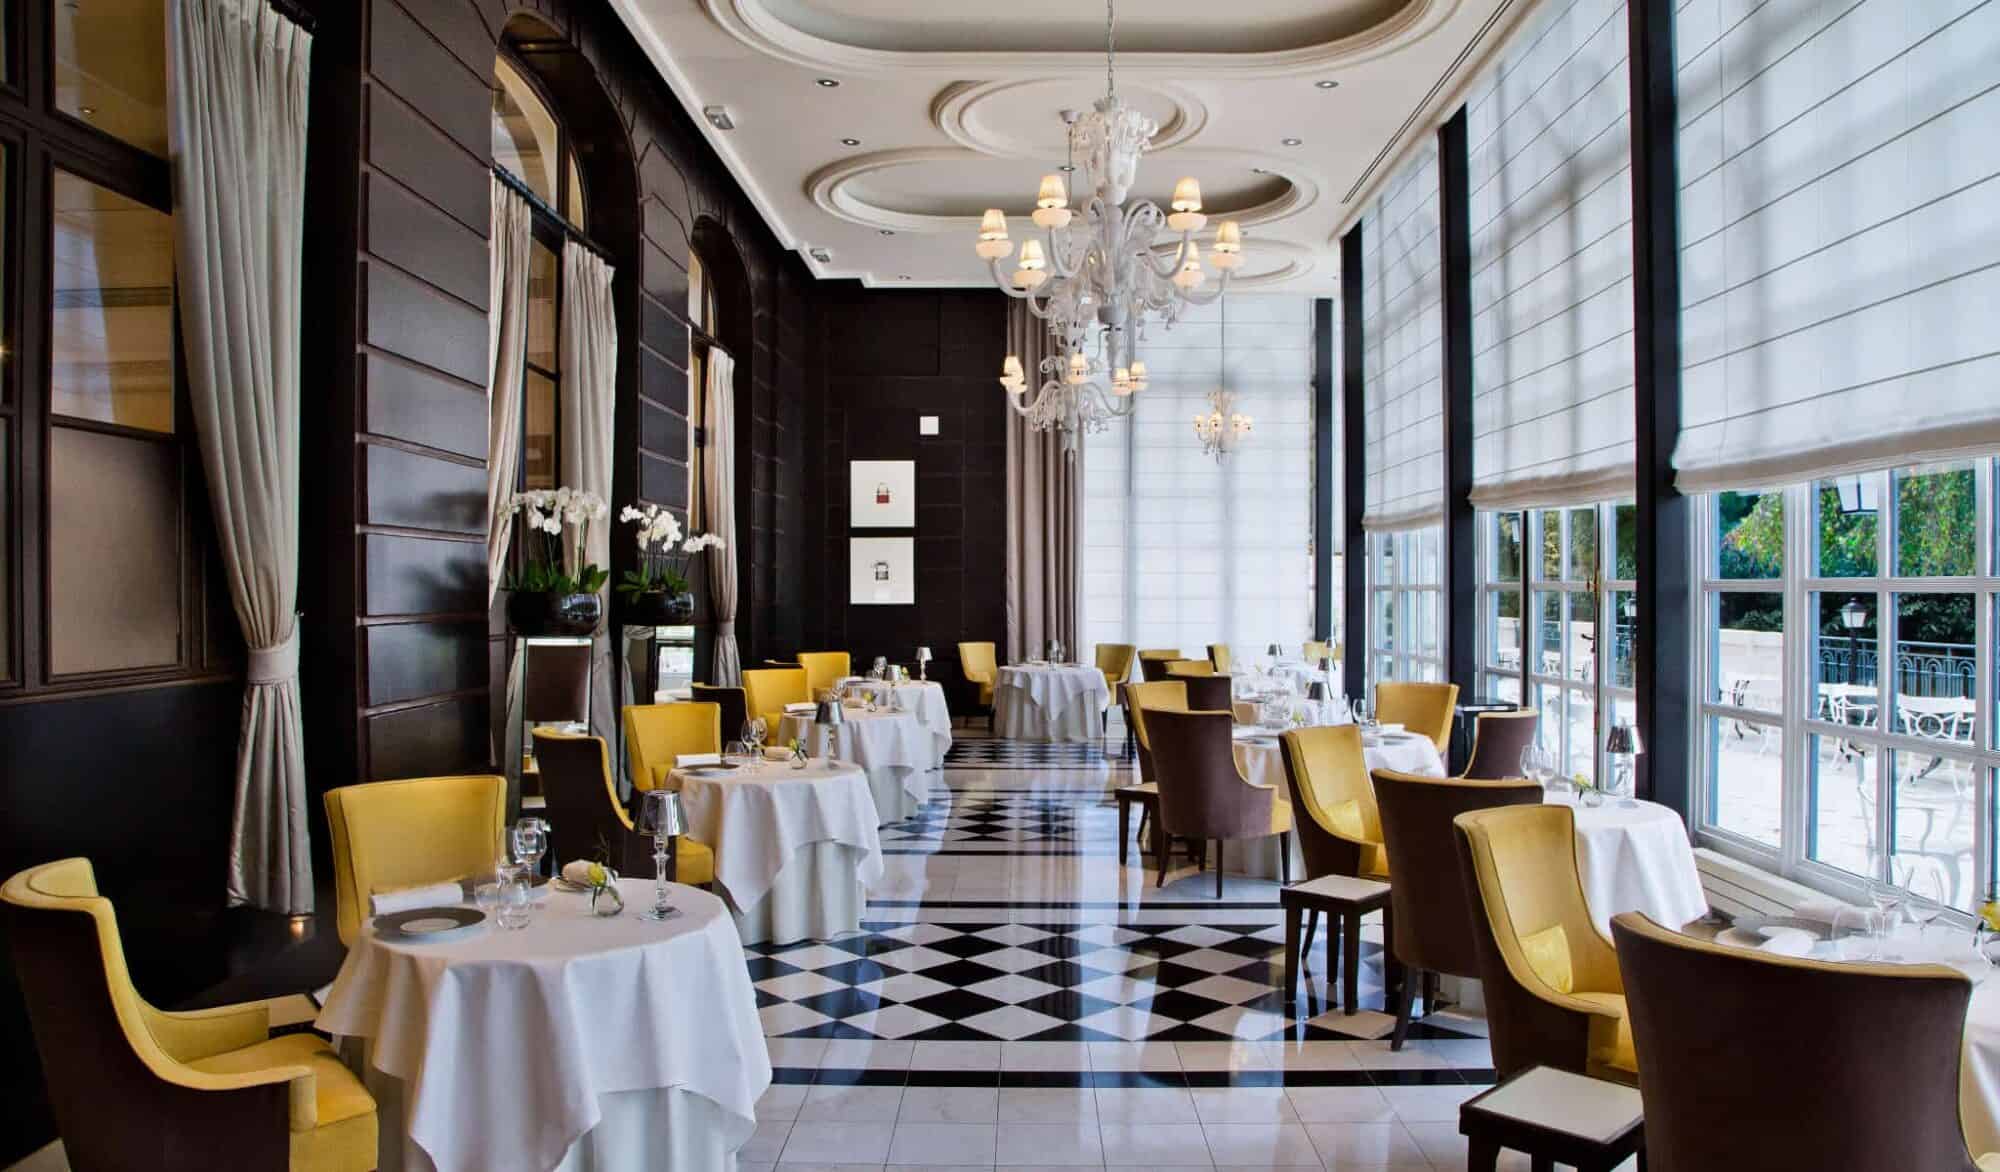 Left: The interiors of Gordon Ramsay Au Trianon with yellow chairs, white rounded tables and brown wooden walls.